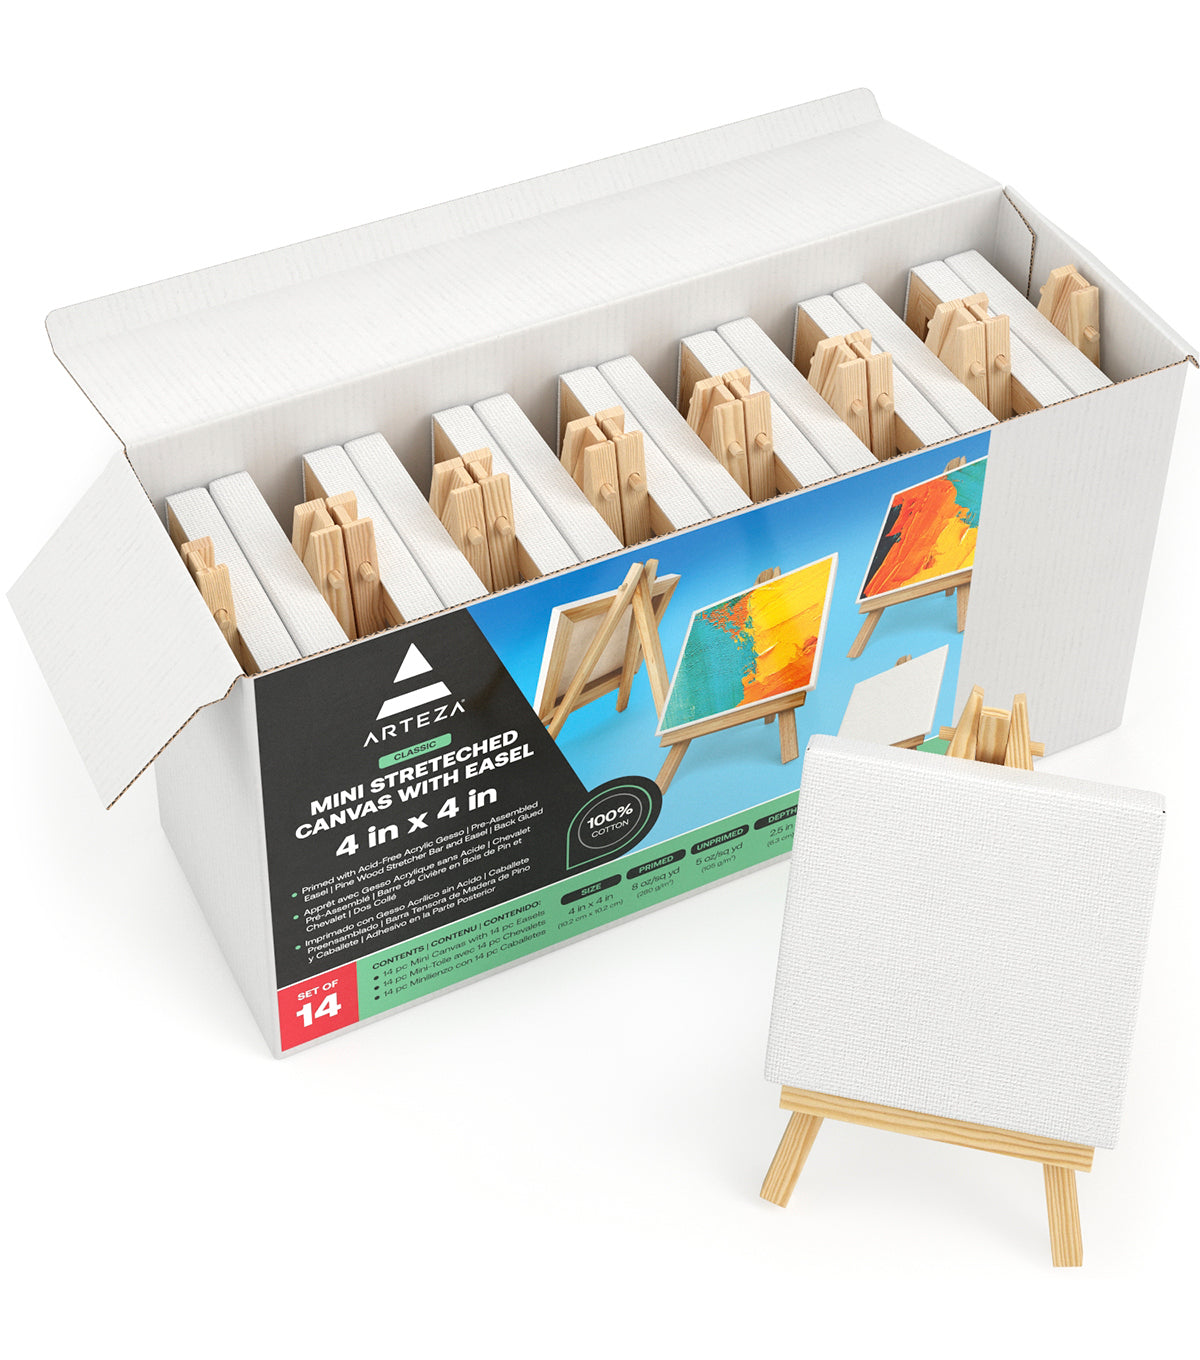  Tosnail 24 Pack 4 x 4 Mini Canvas and Easel Set